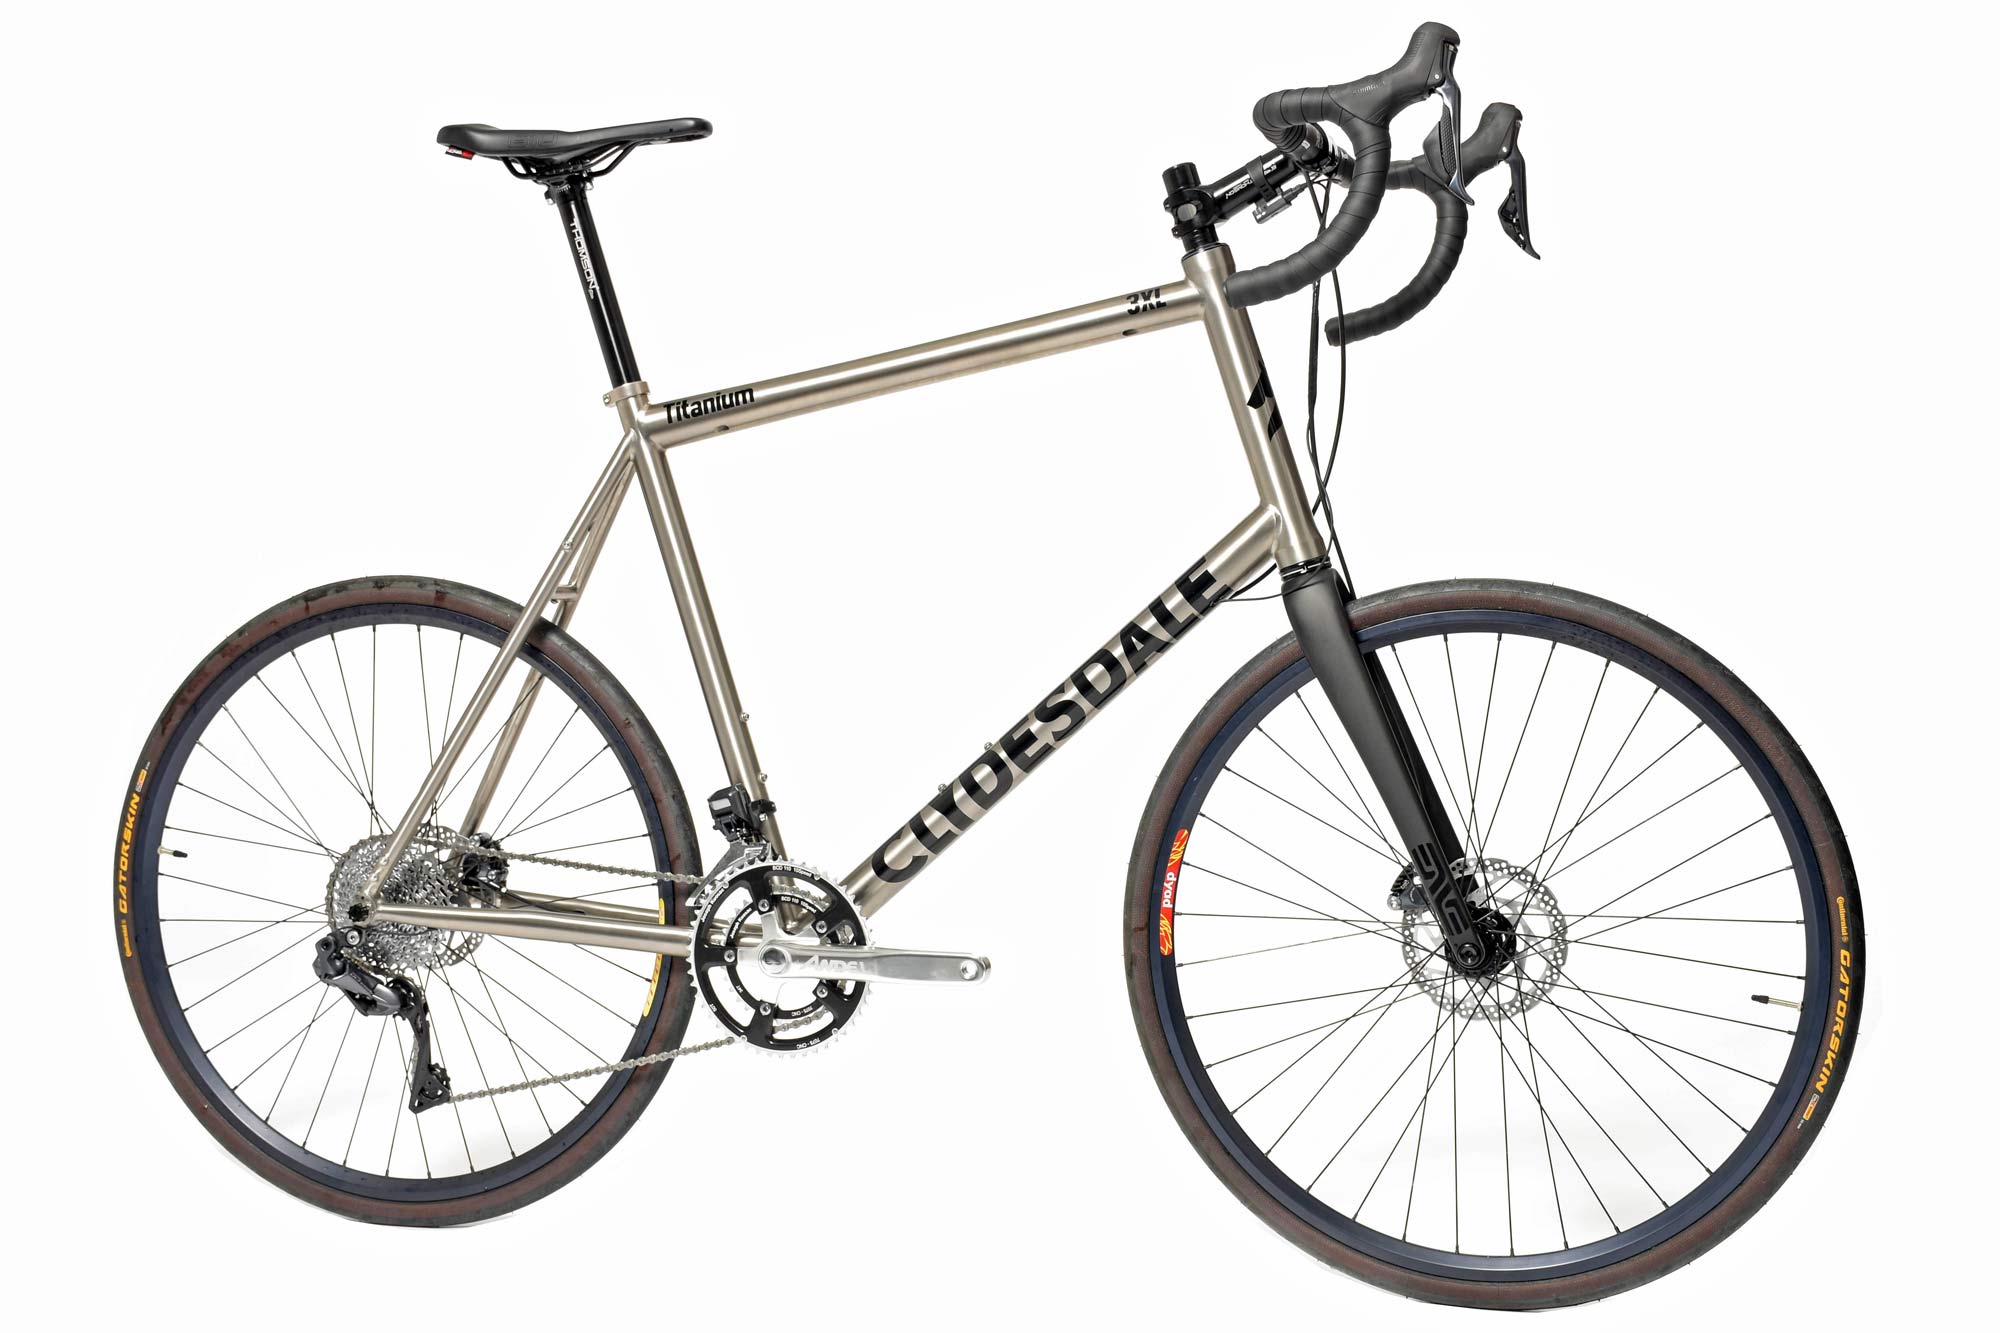 Clydesdale Bicycles Draft & Team titanium road & gravel bikes for Big & Tall riders